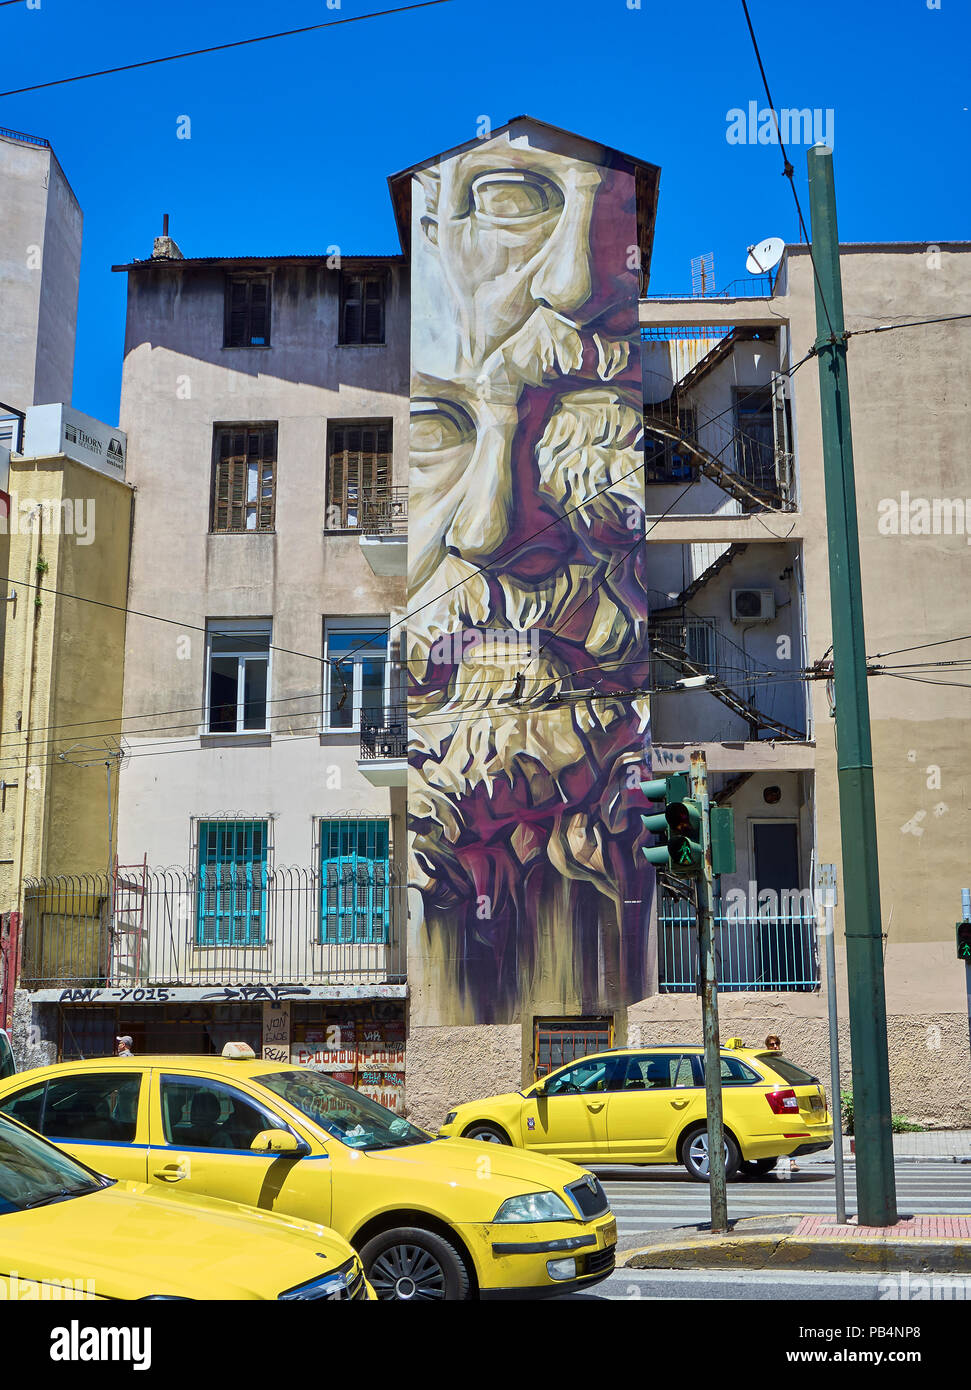 Athens, Greece - June 29, 2018. Graffiti of philosopher Solon, founder of Athenian democracy, by INO, a visual artist from Greece, in a building facad Stock Photo